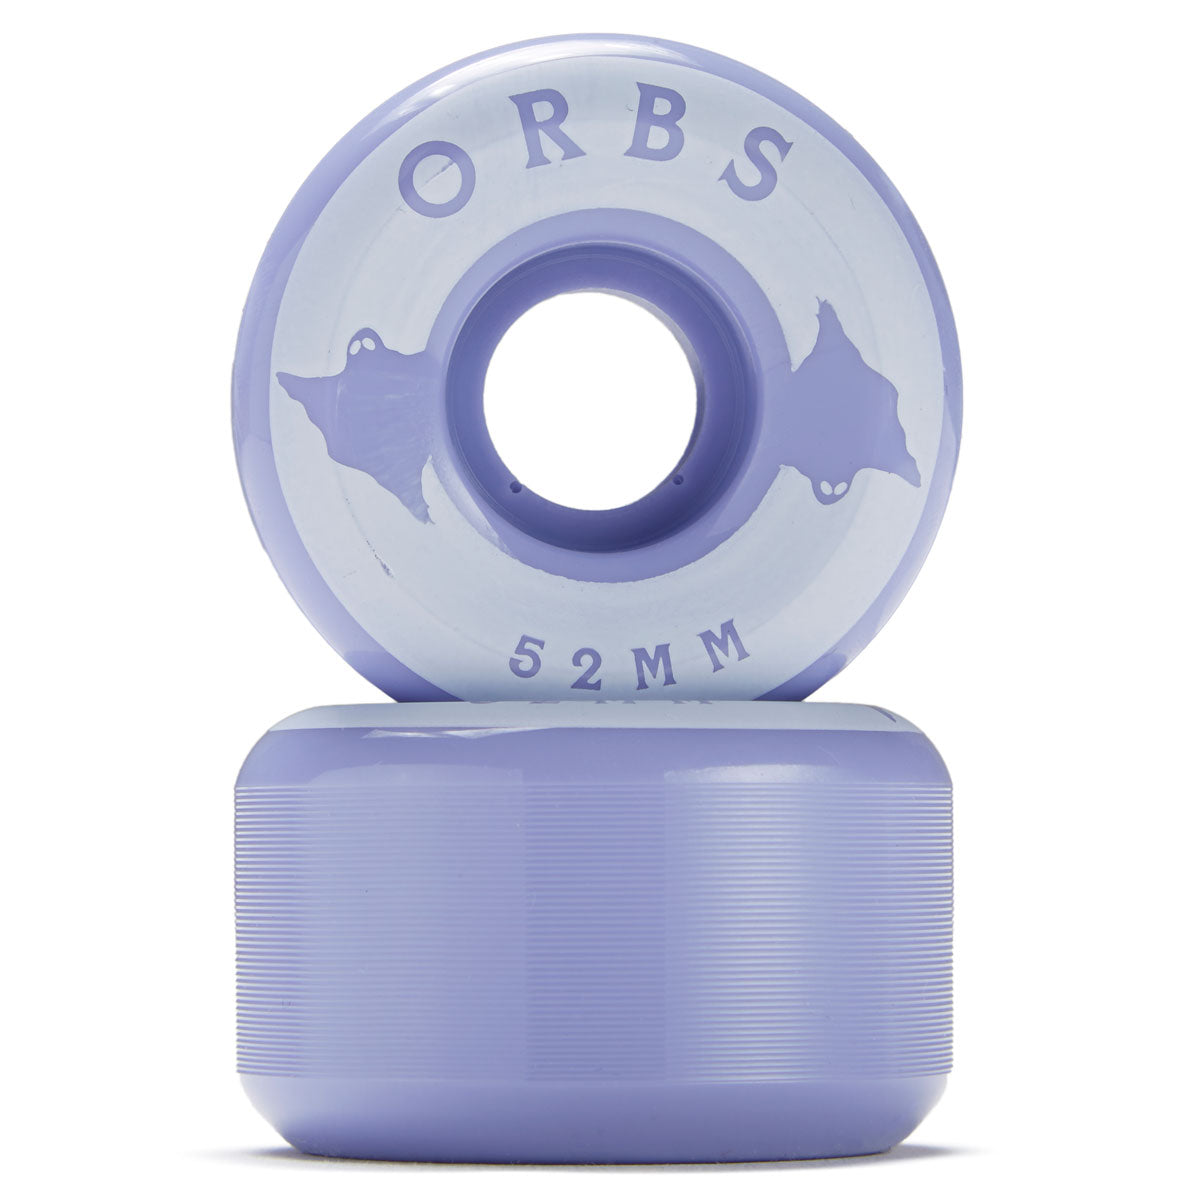 Welcome Orbs Specters 99A Skateboard Wheels - Lavender - 52mm image 2